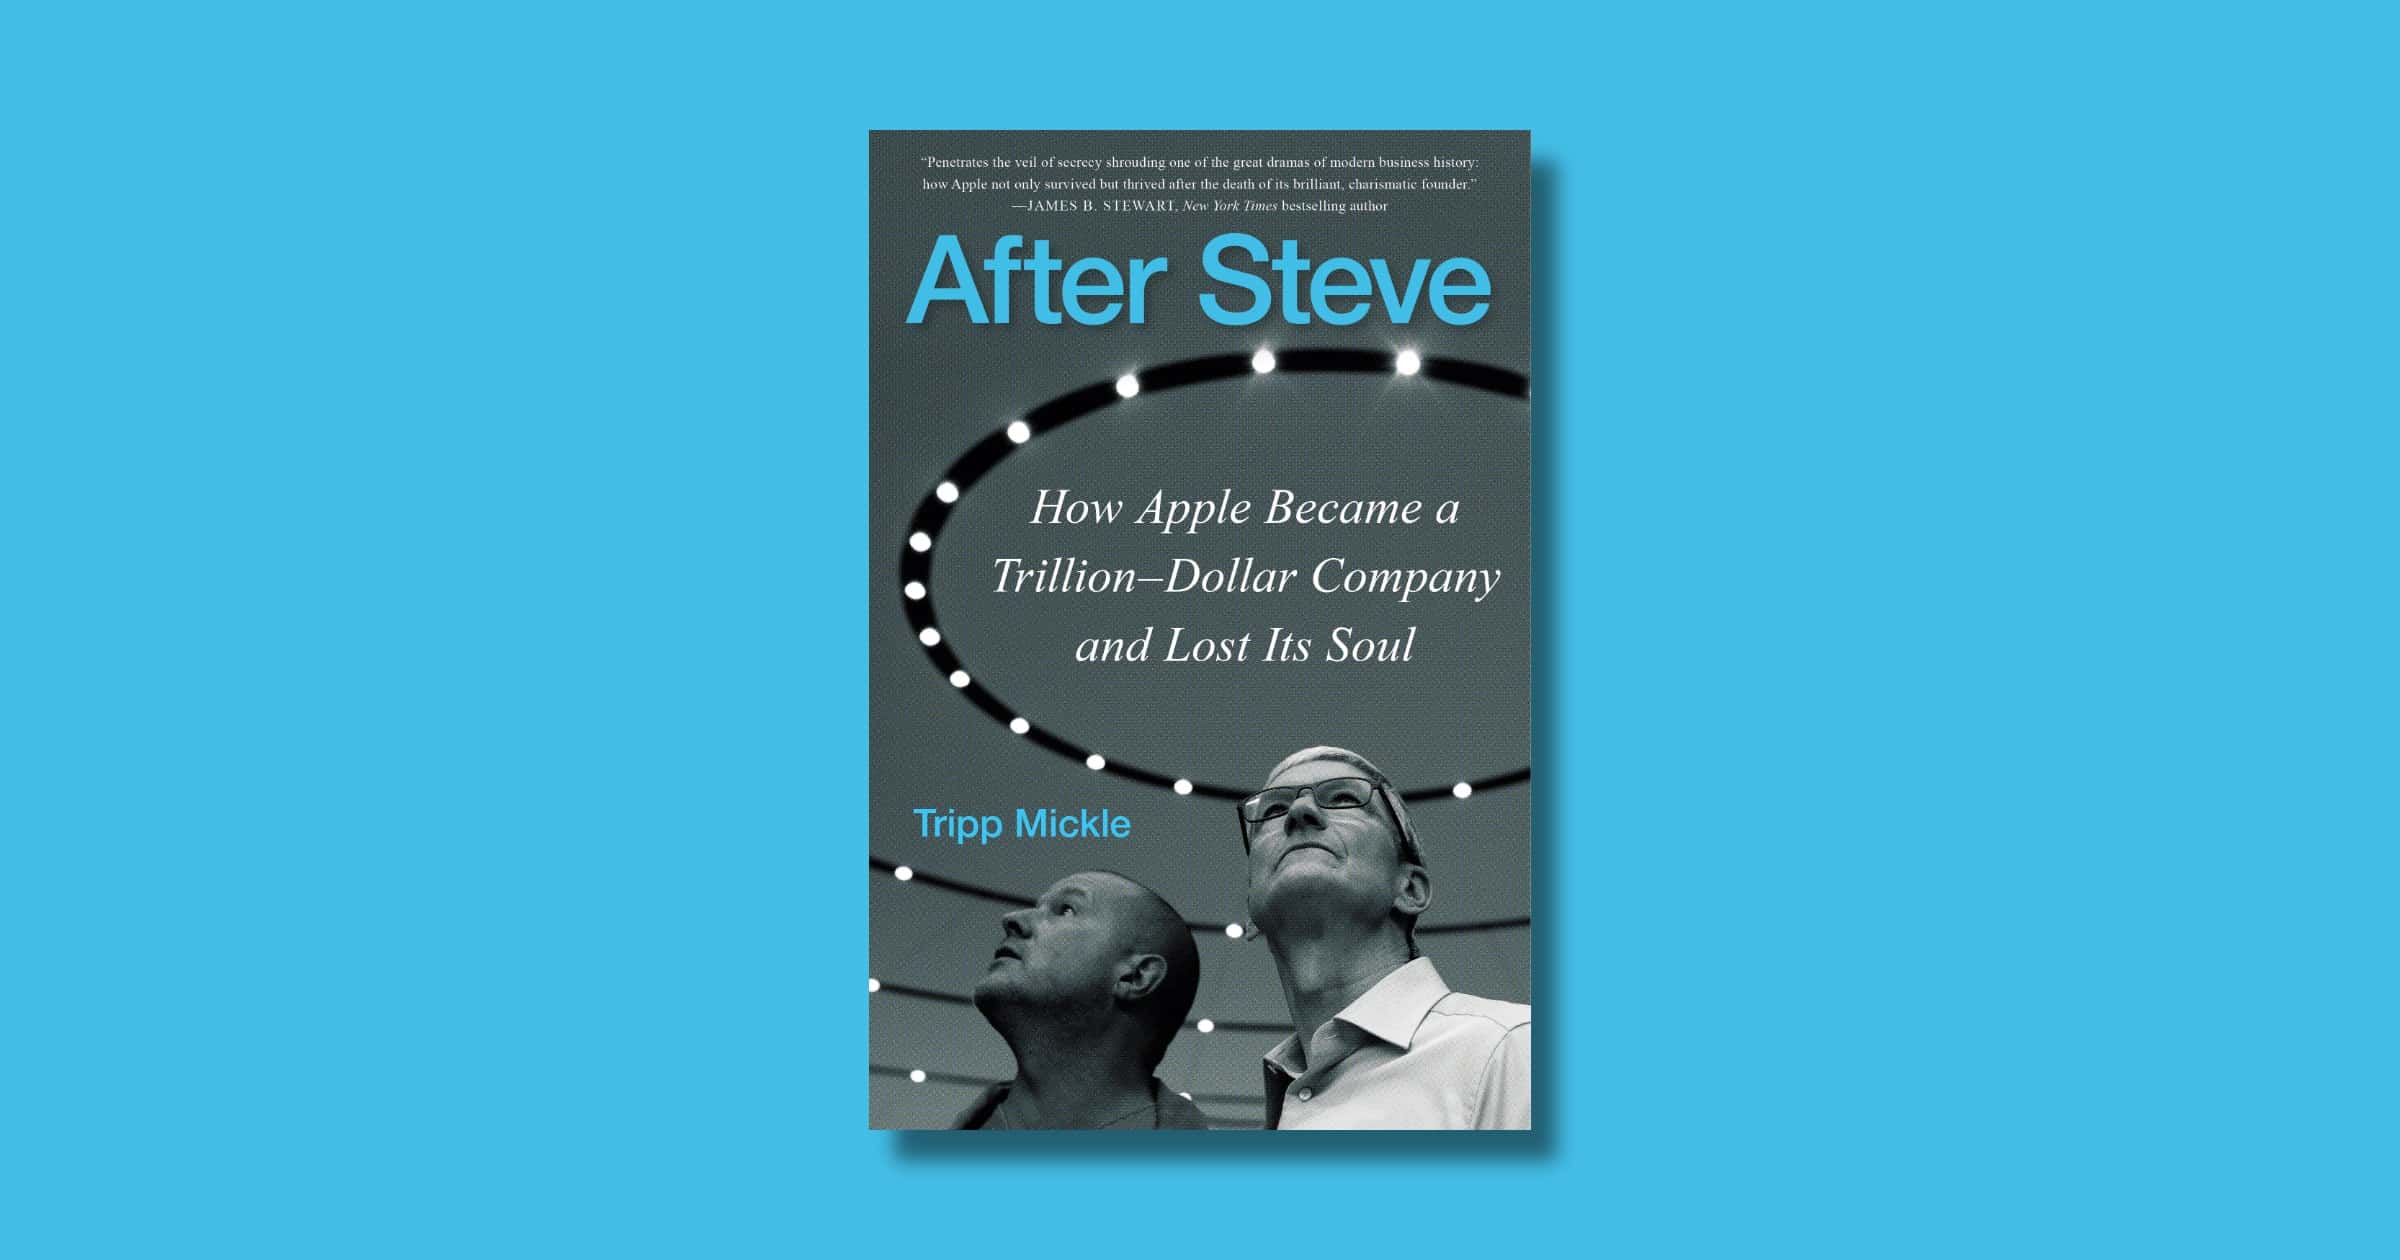 Tripp Mickle’s Book ‘After Steve’ Covers Apple’s Rise to Trillions